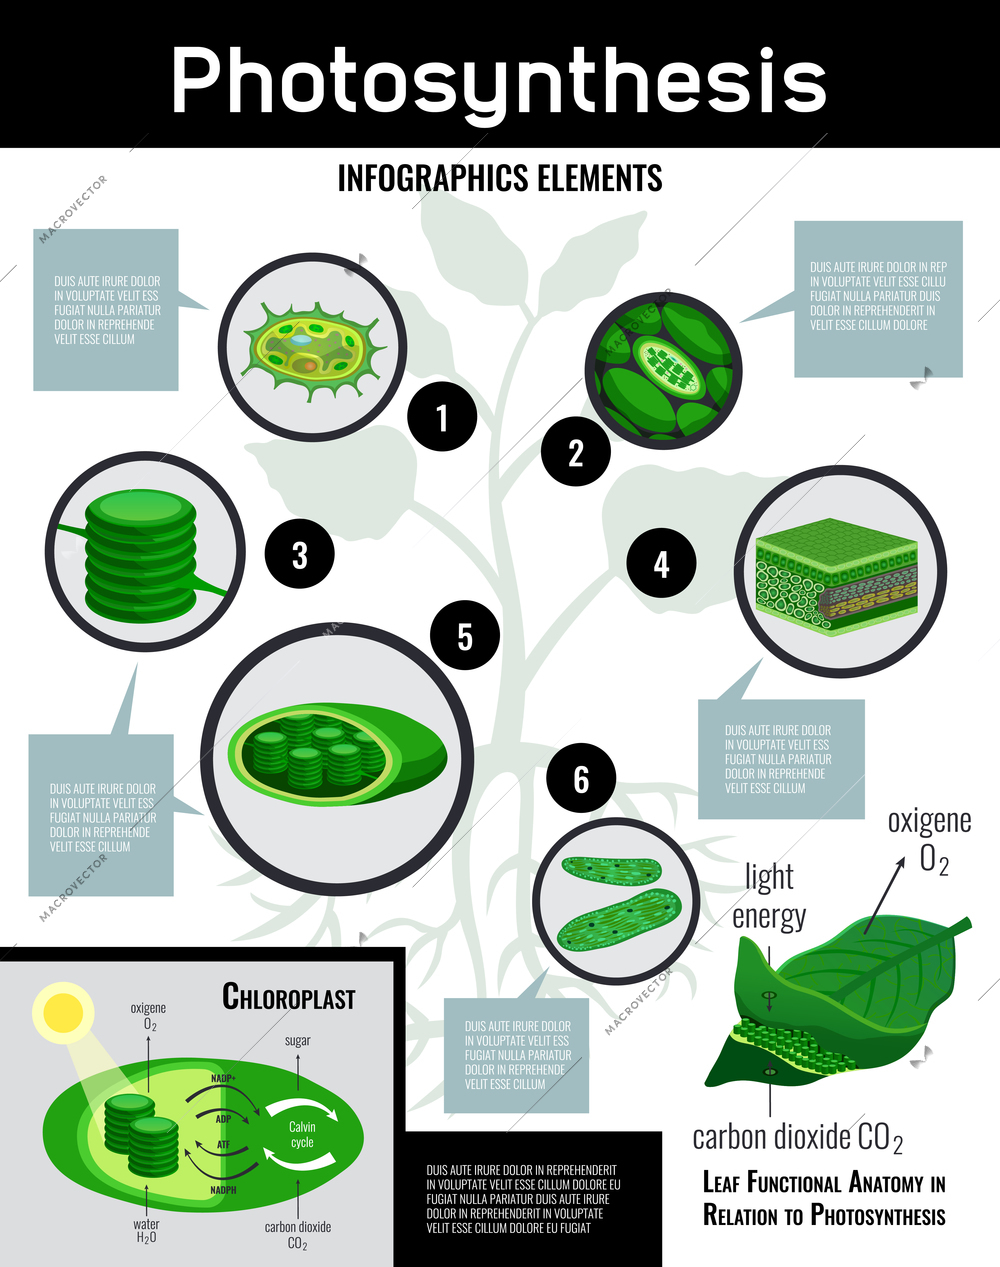 Photosynthesis light energy in cells food conversion process schema infographic elements with description educational  poster vector illustration